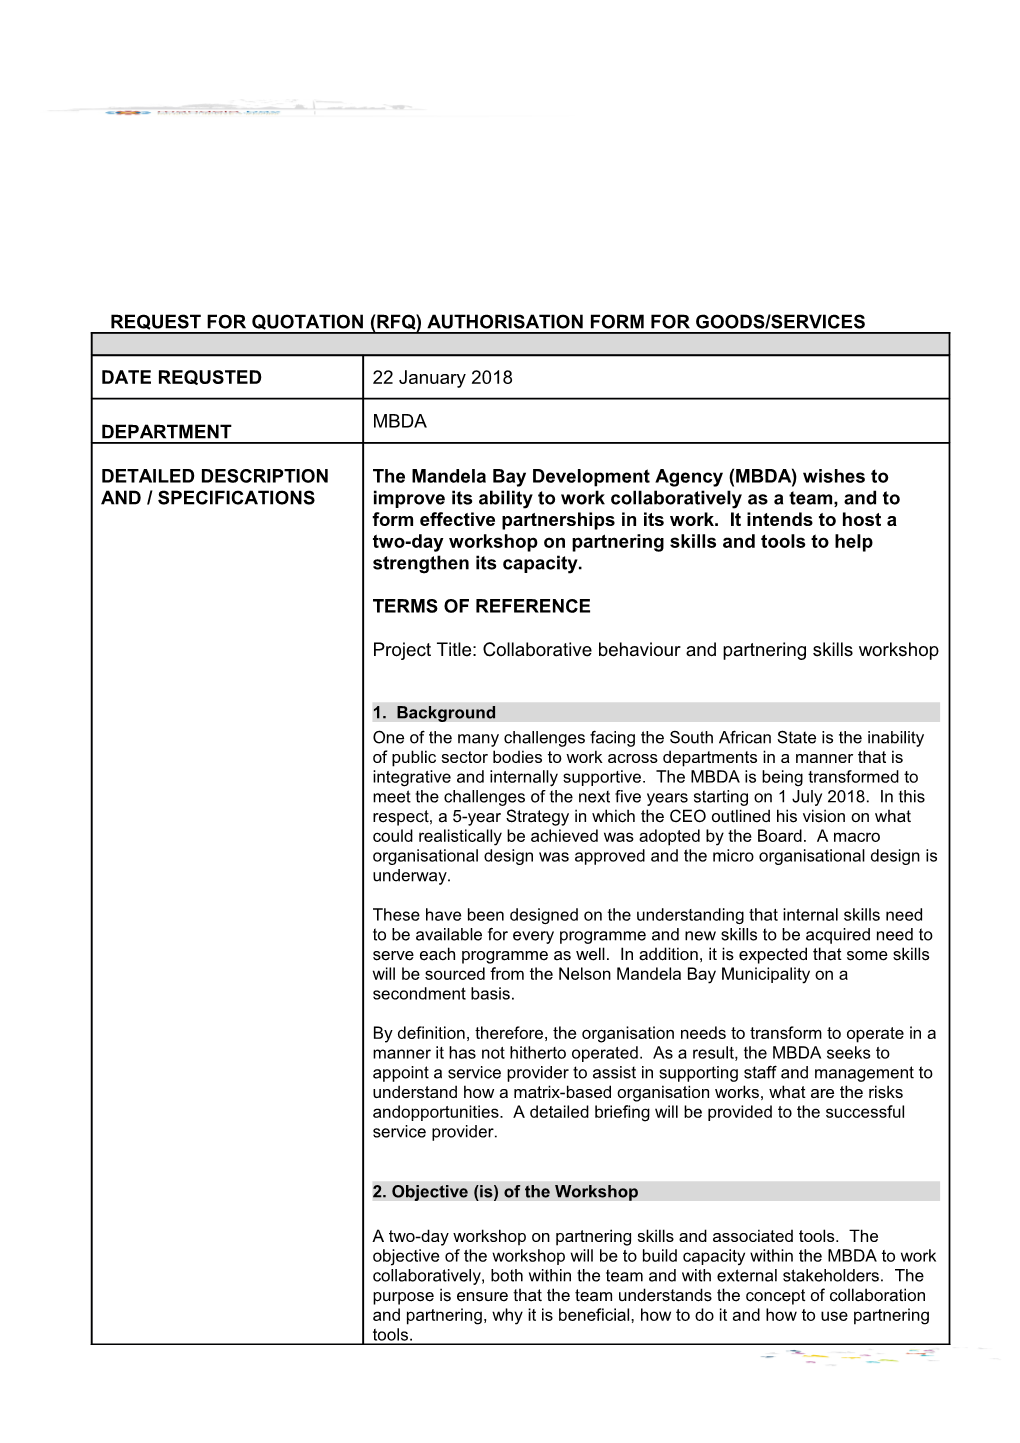 Request for Quotation (Rfq) Authorisation Form for Goods/Services